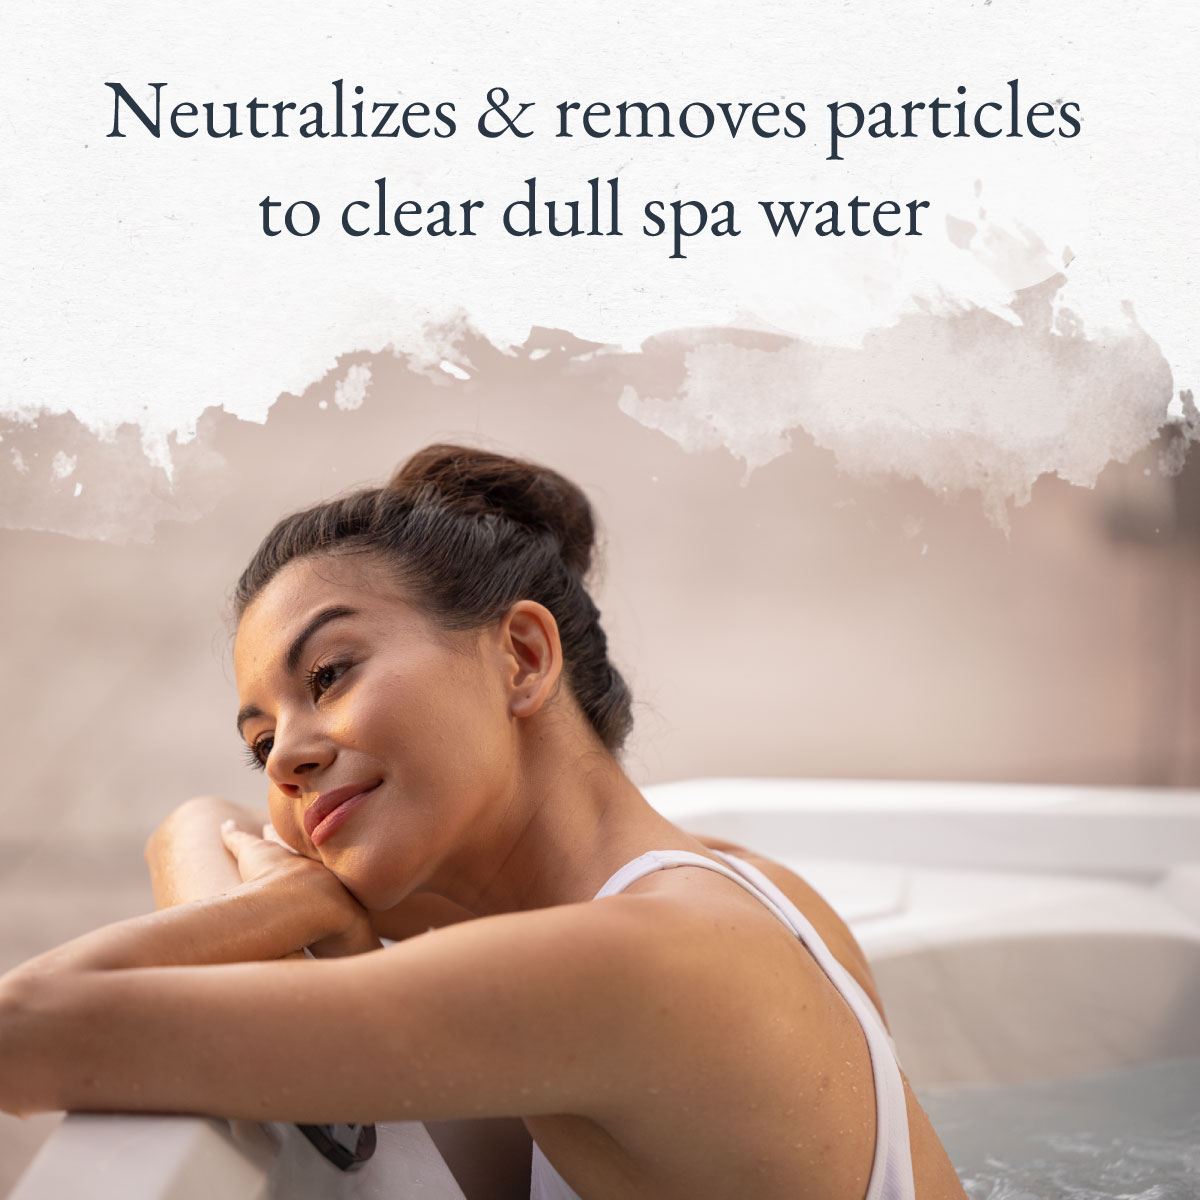 Neutralizes & removes particles to clear dull spa water